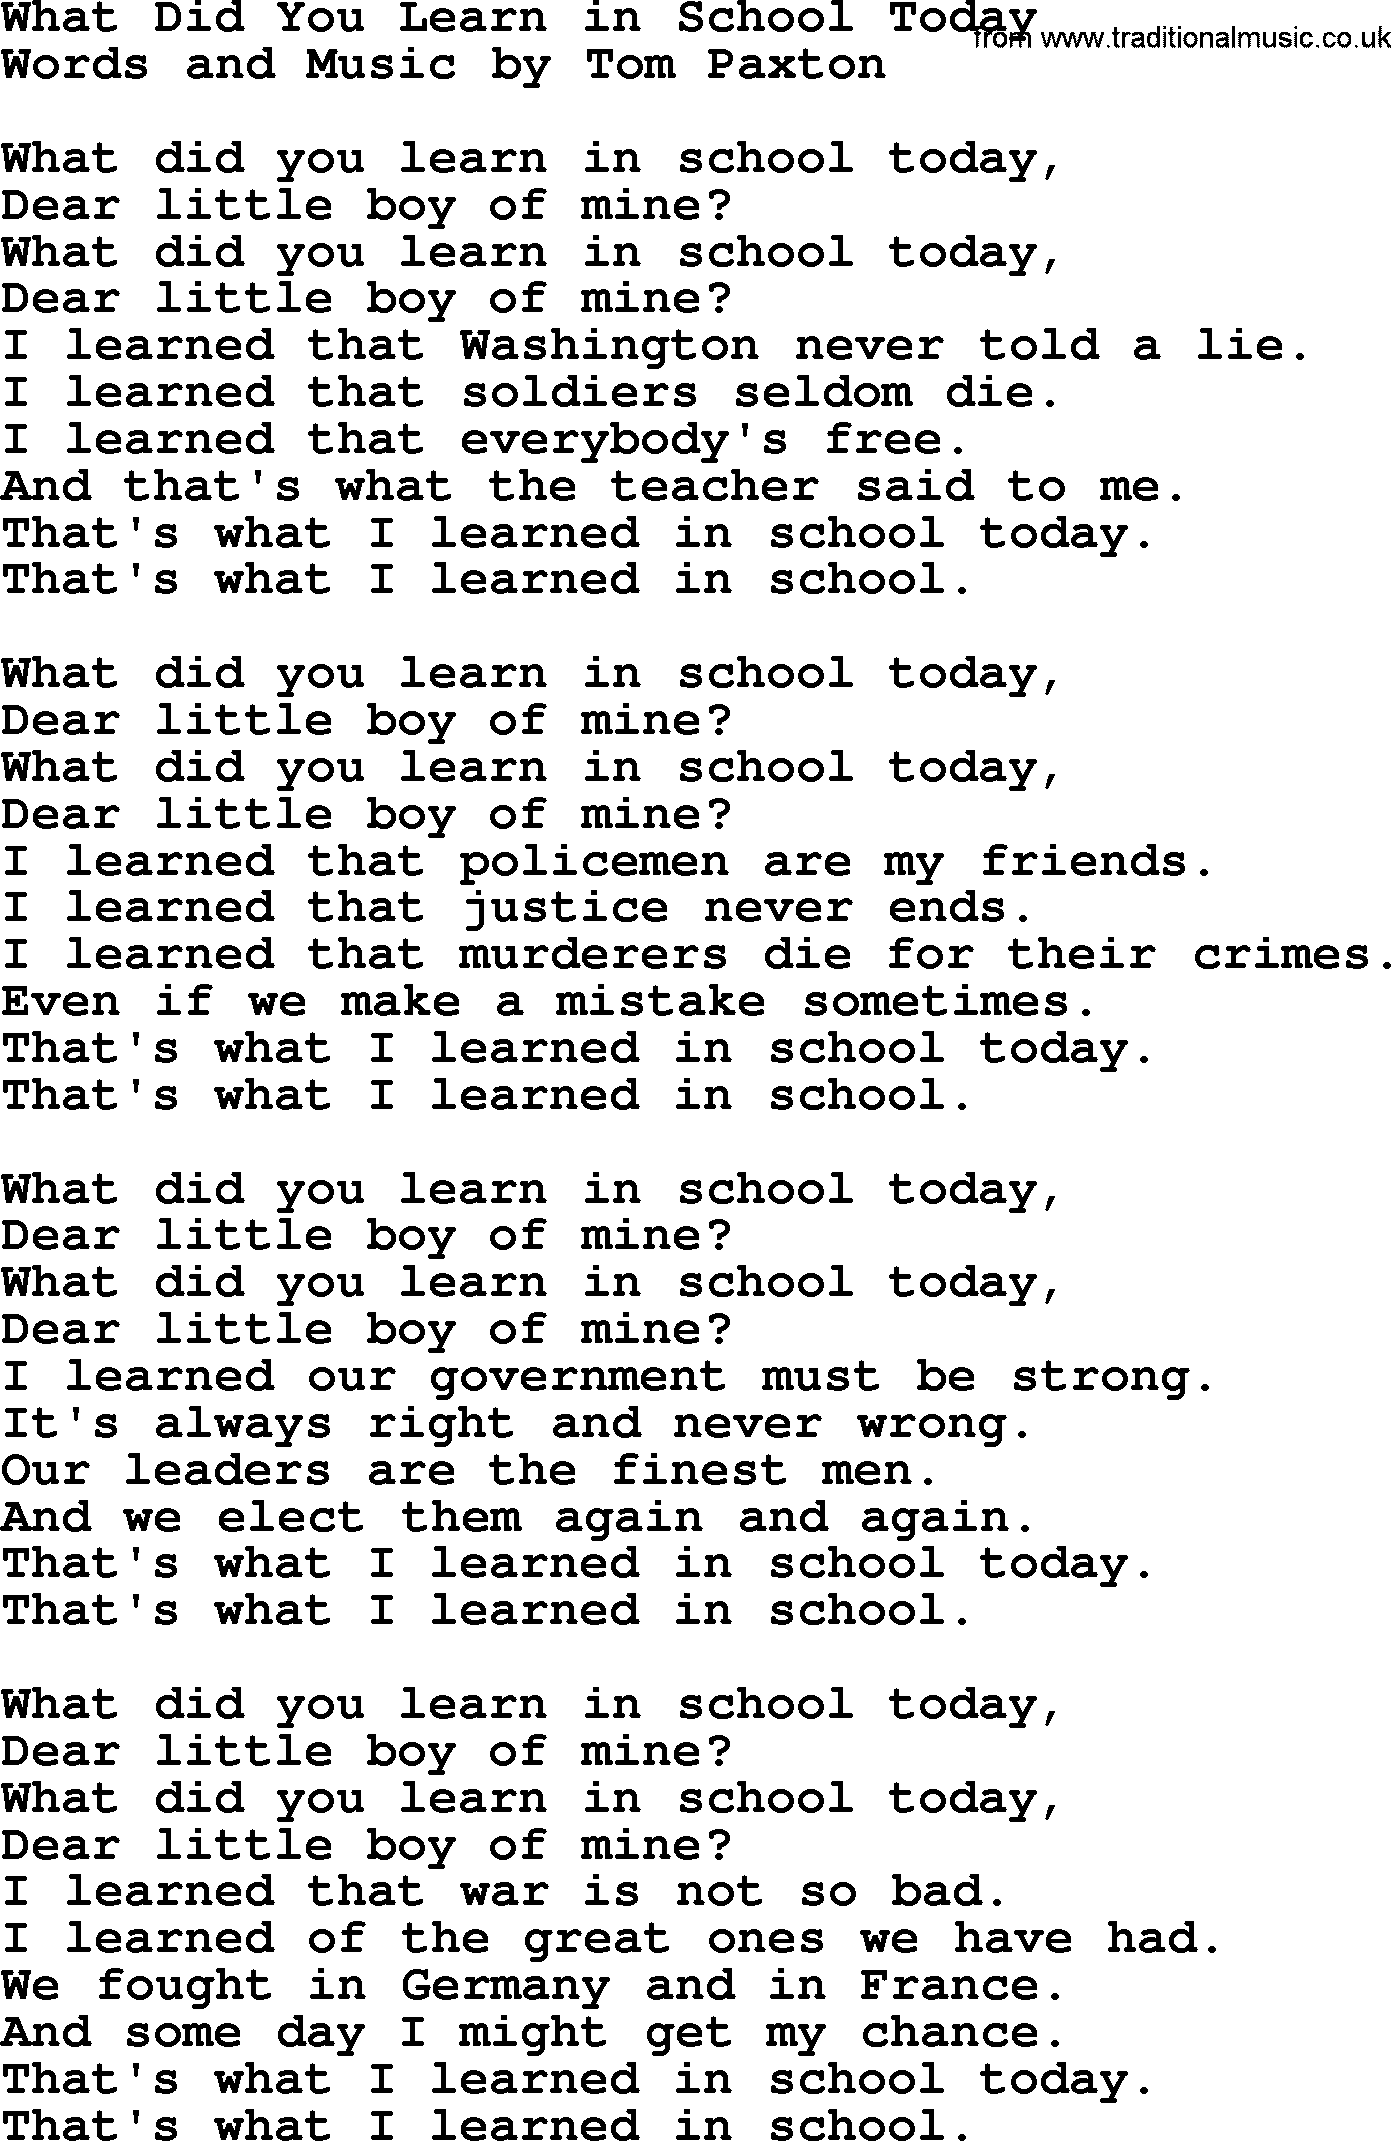 Tom Paxton song: What Did You Learn In School Today, lyrics